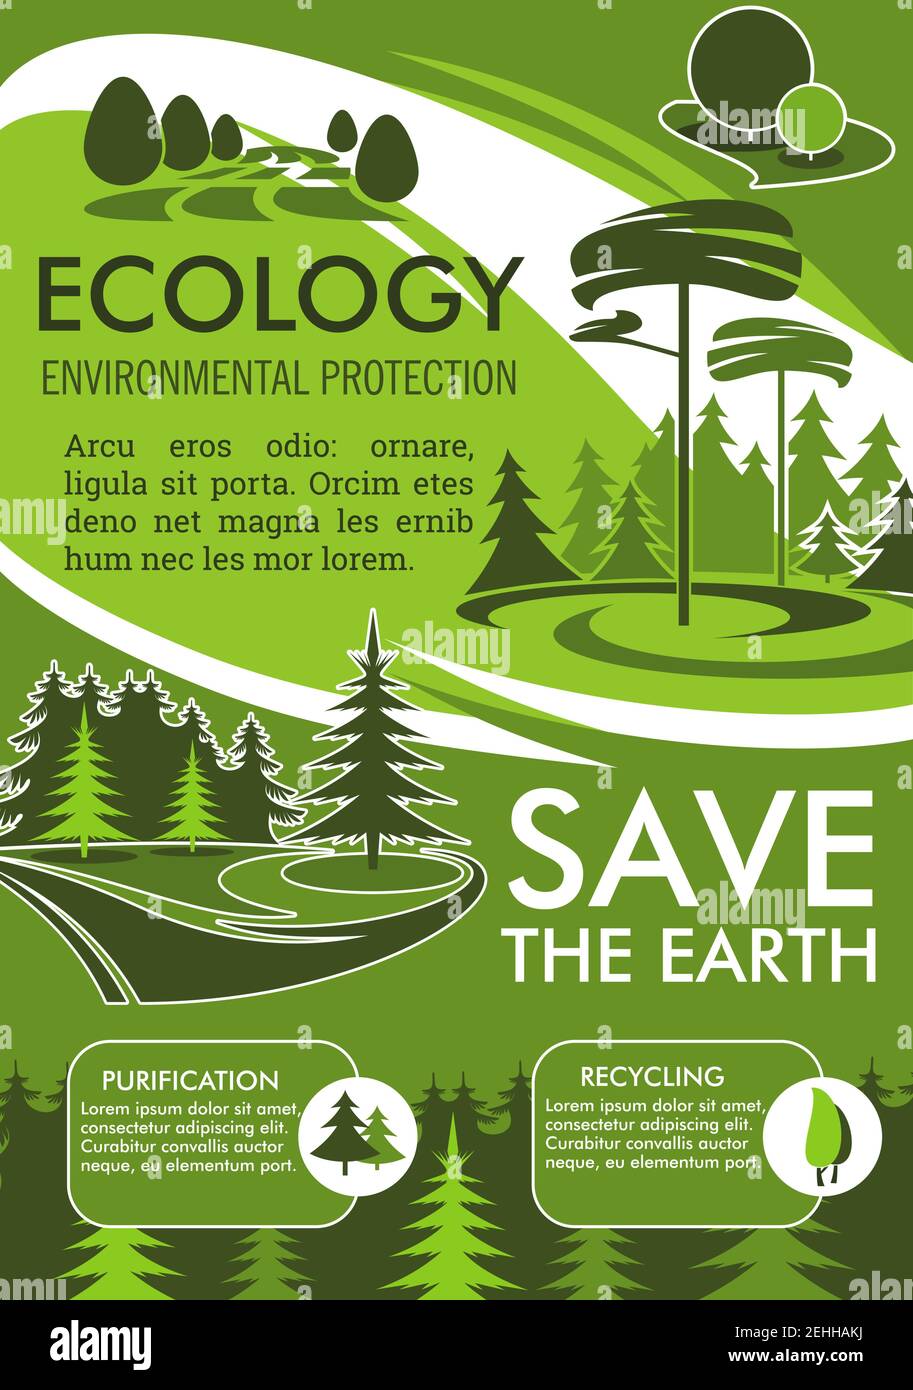 posters on environment protection